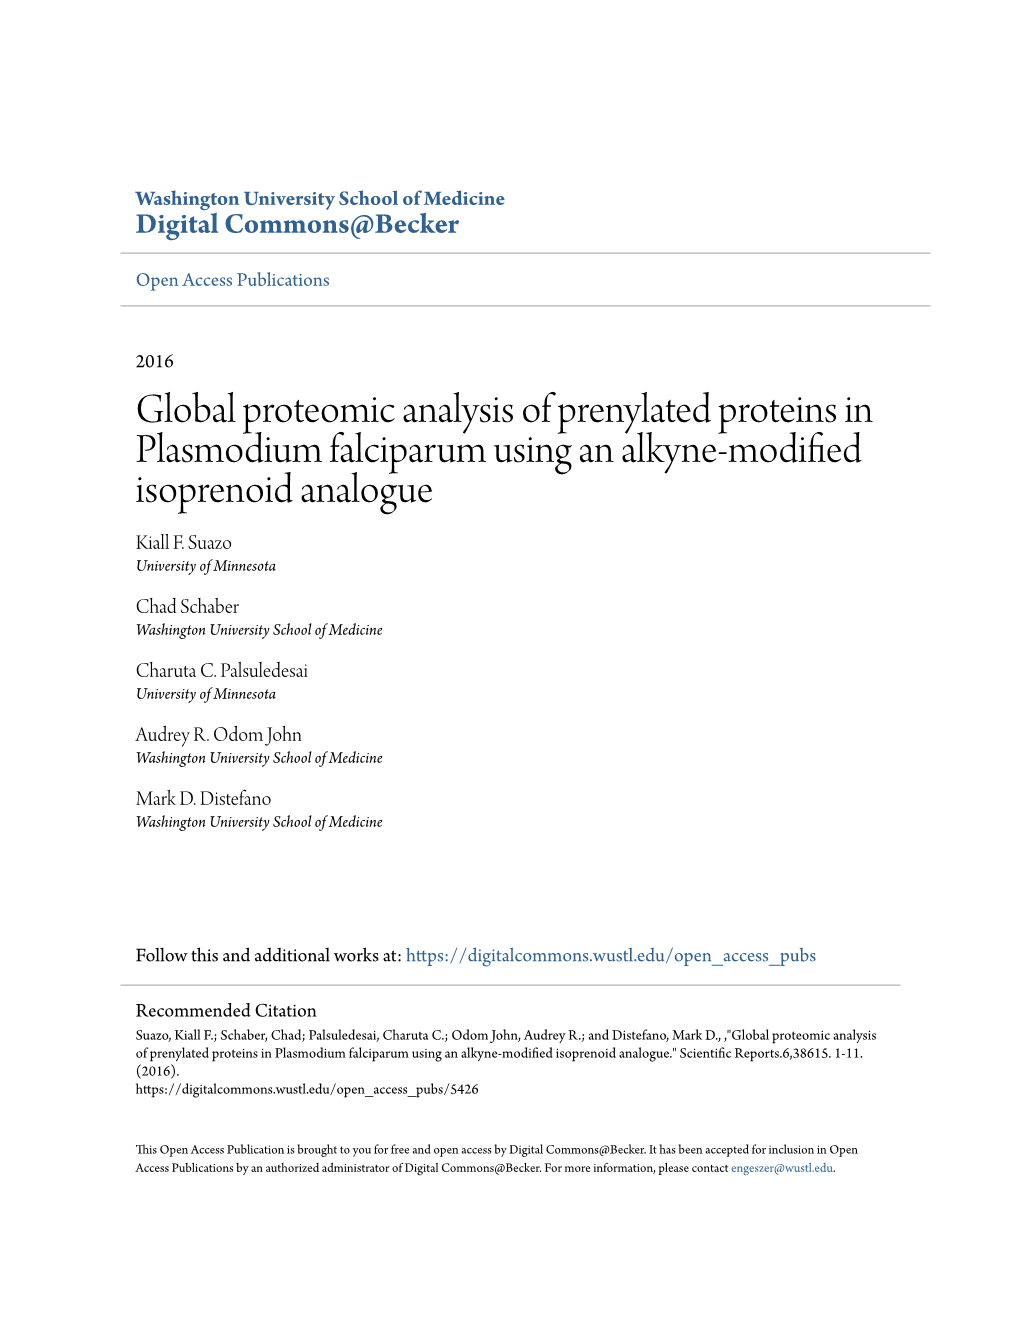 Global Proteomic Analysis of Prenylated Proteins in Plasmodium Falciparum Using an Alkyne-Modified Isoprenoid Analogue Kiall F